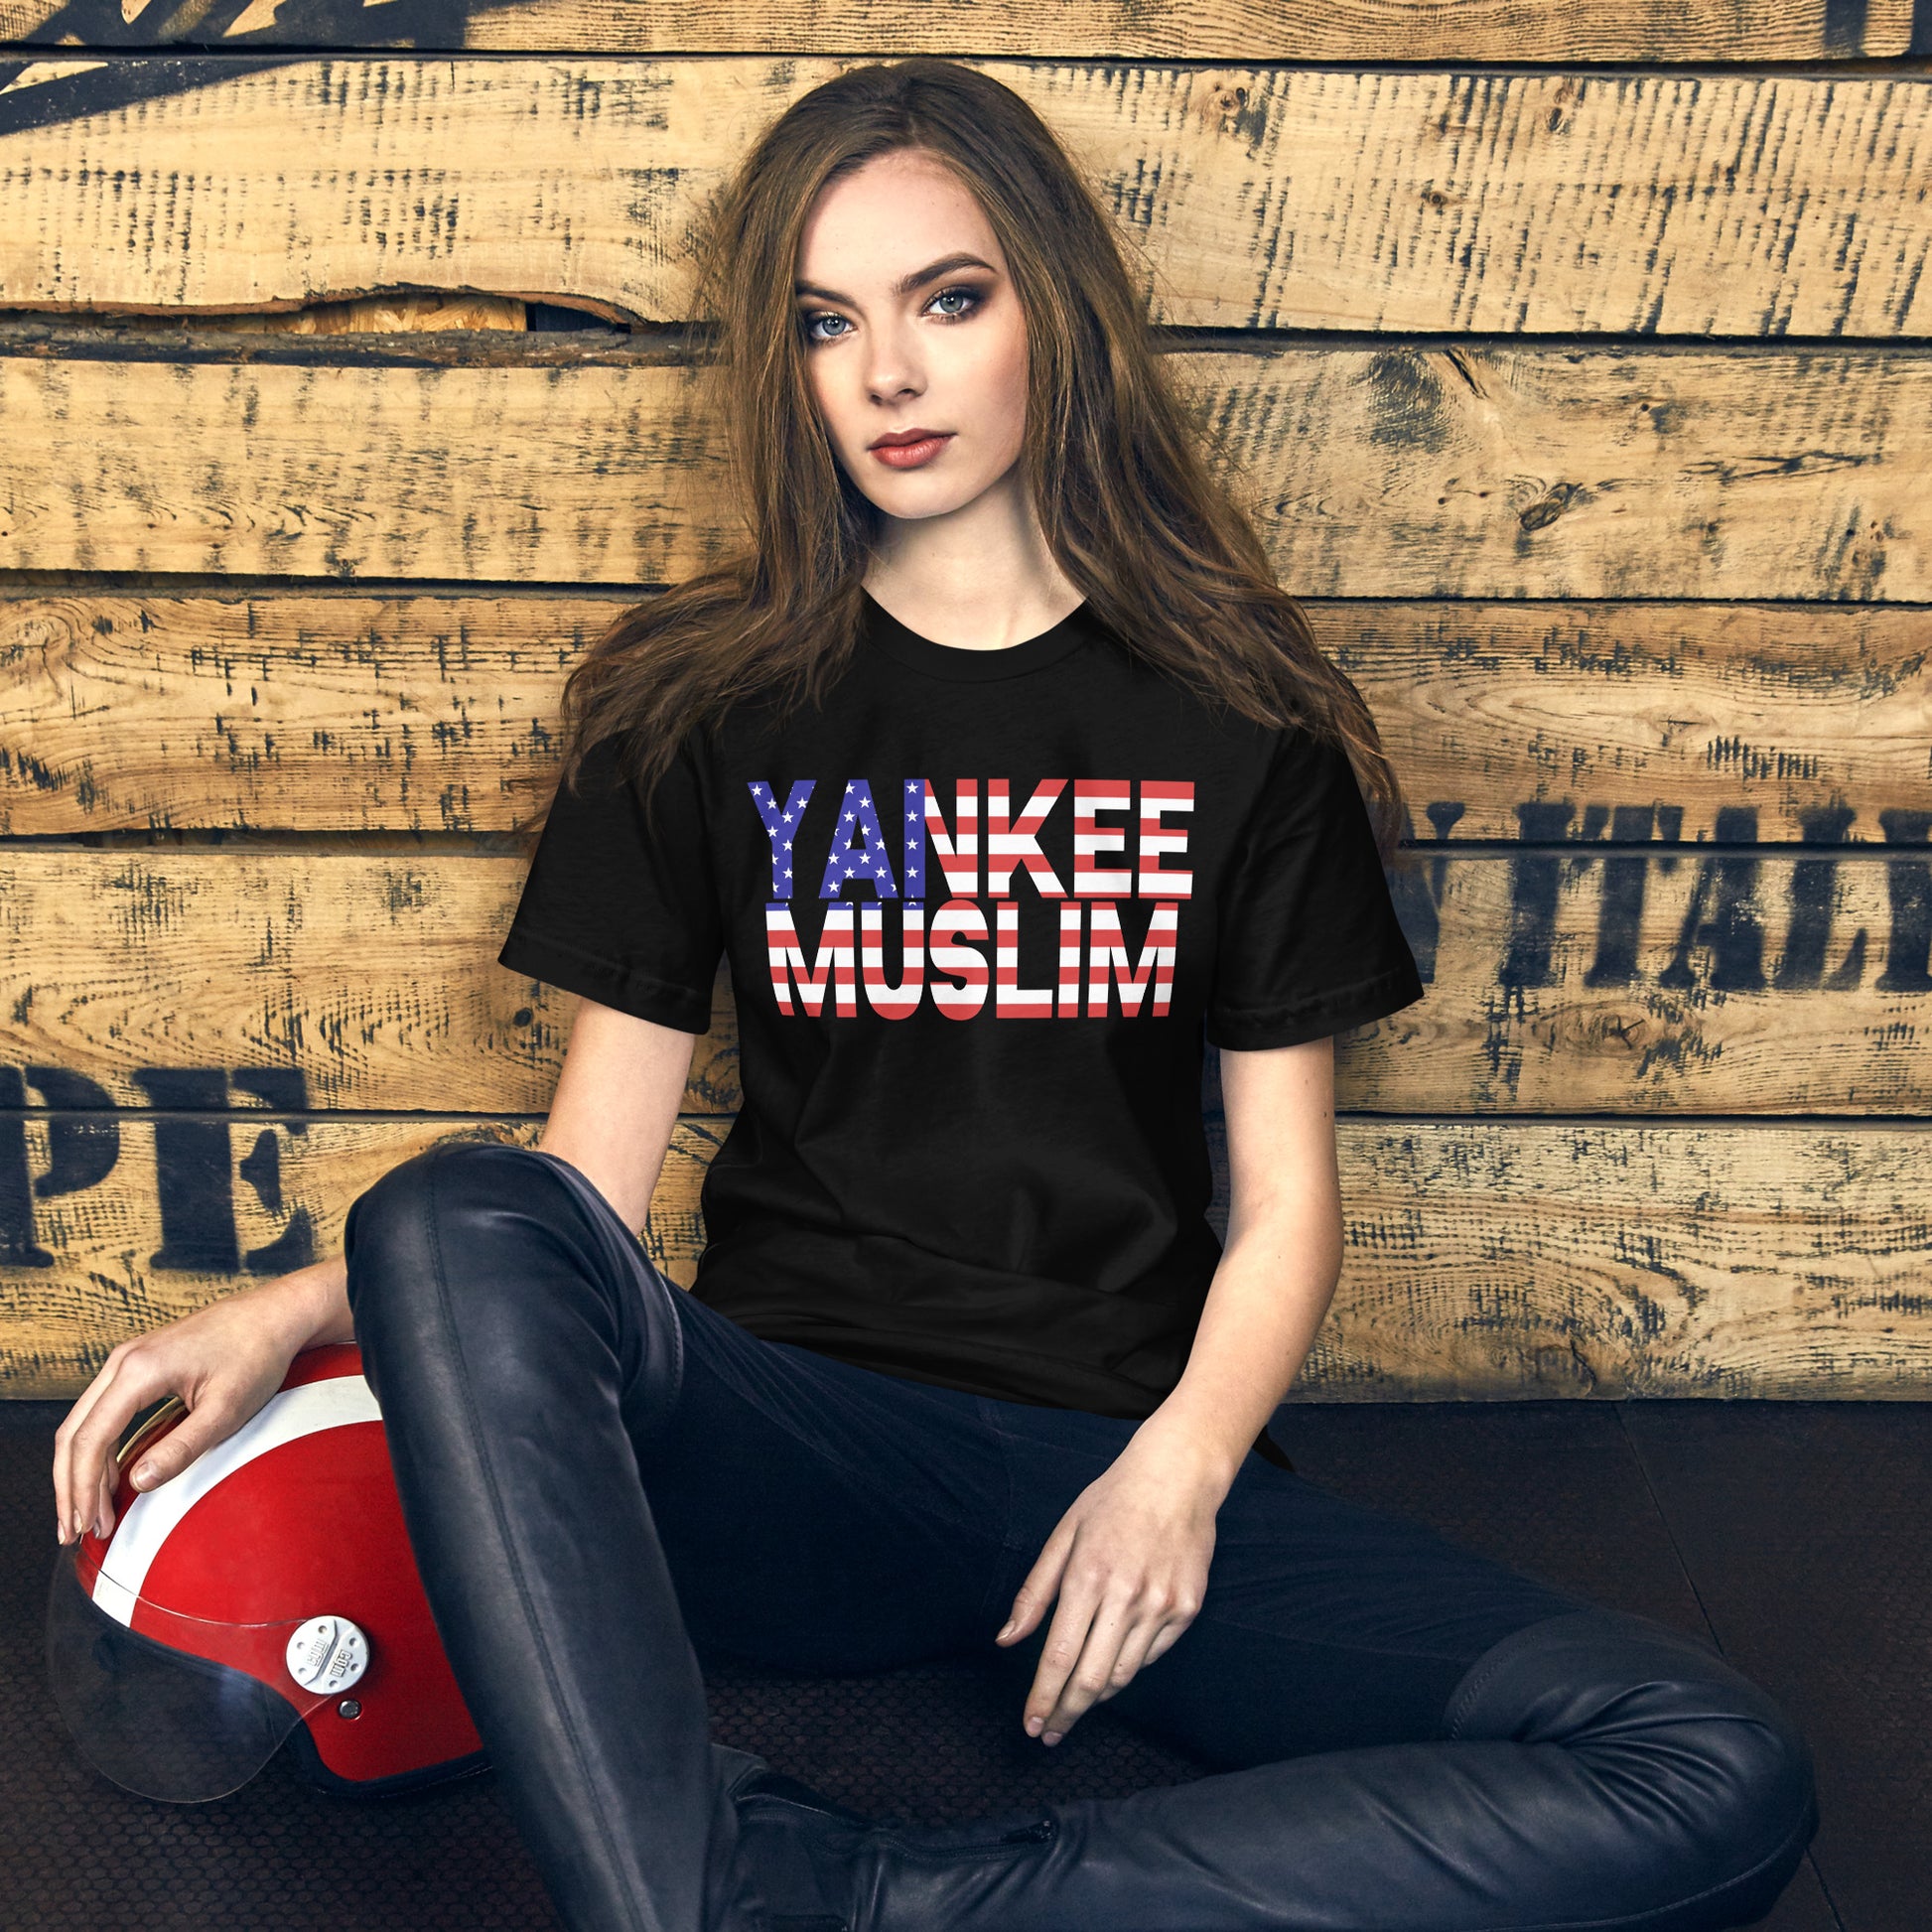 A black unisex t-shirt with the words ‘Yankee Muslim’ boldly printed in red, white, and blue—the iconic colors of the American flag.